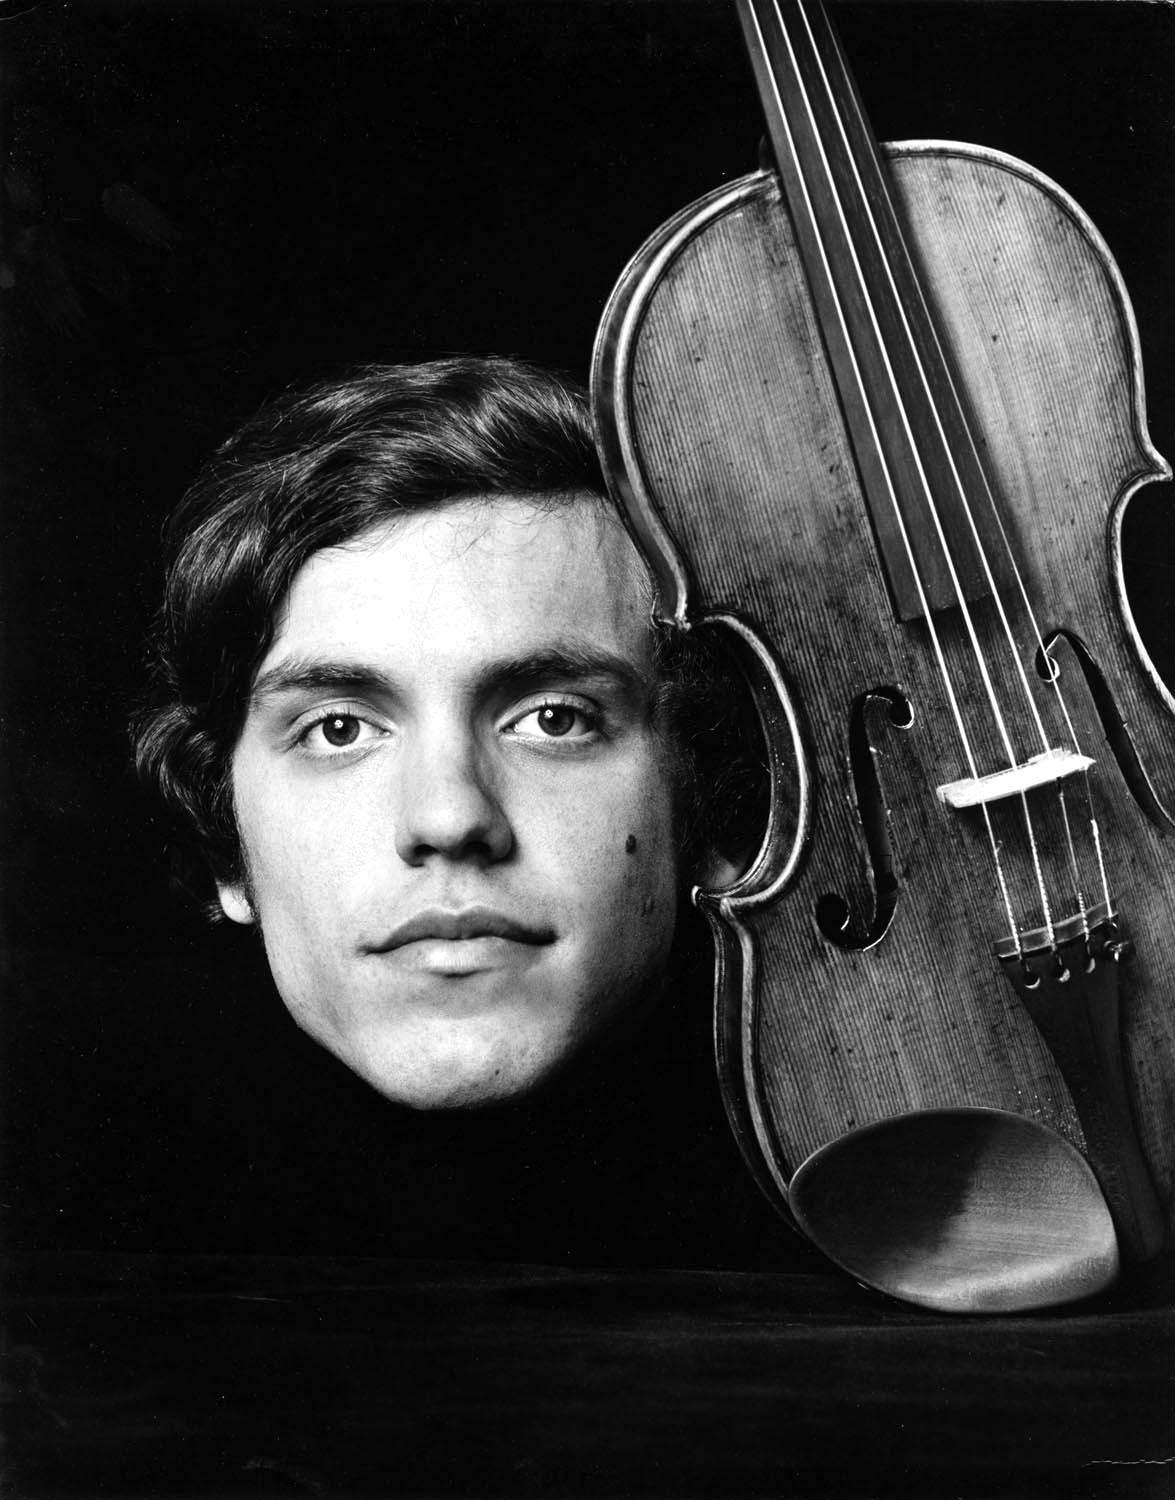 Jack Mitchell Portrait Photograph - American classical violinist Eugene Fodor, photographed for After Dark magazine